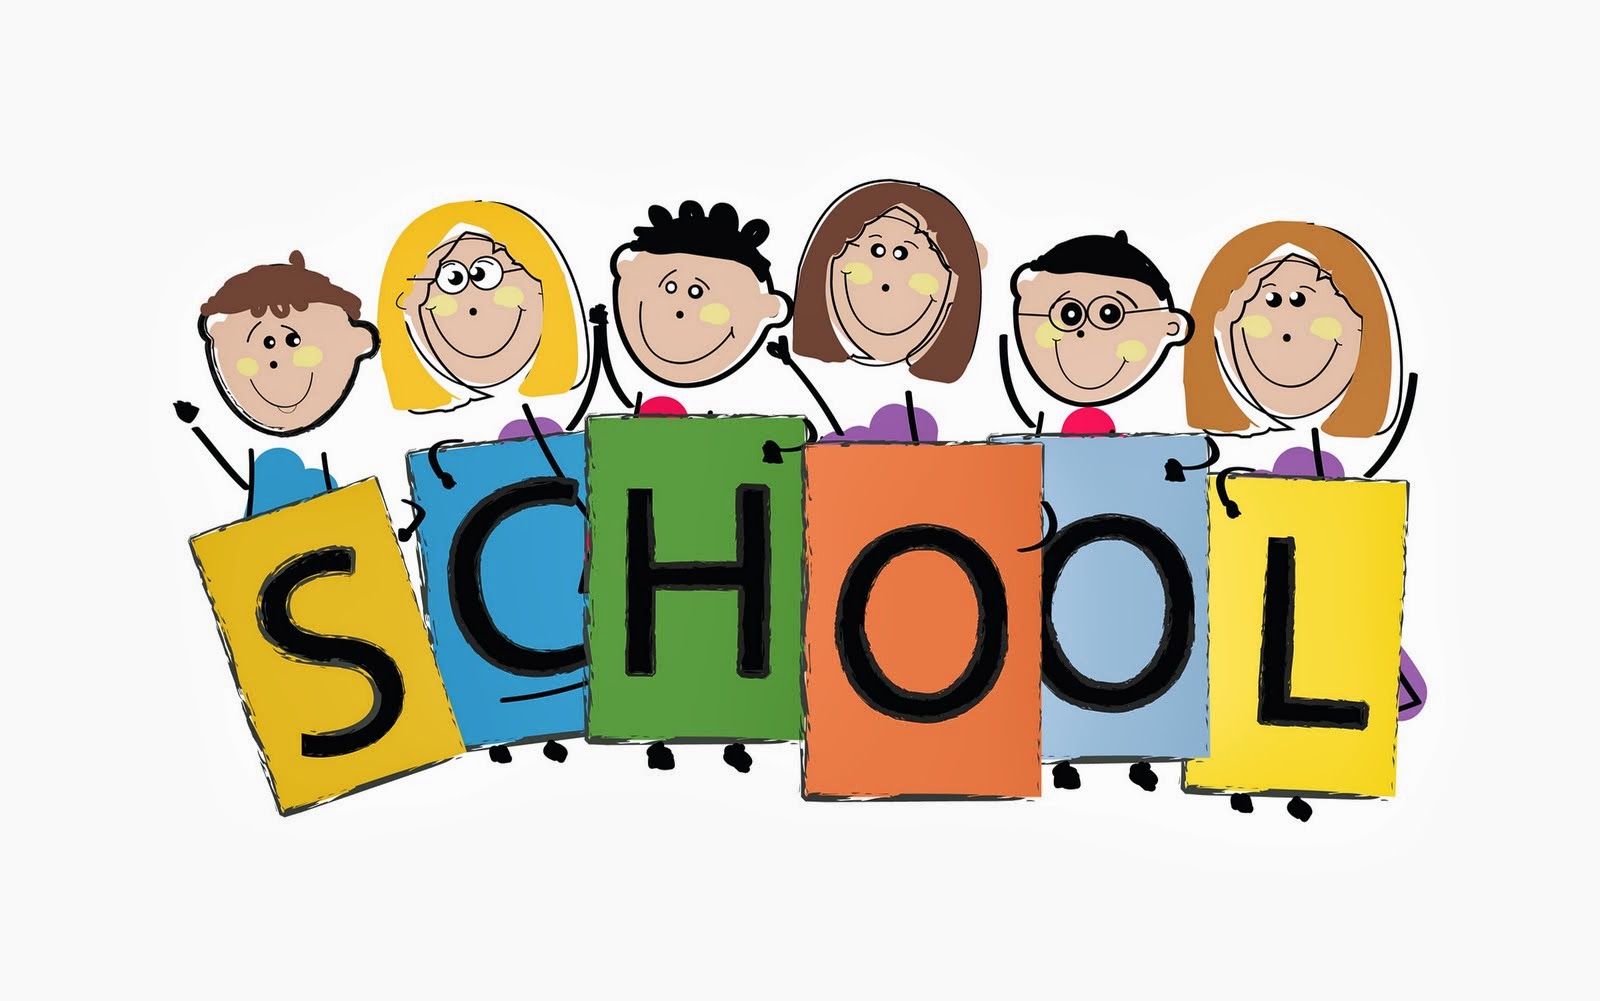 Pictures For School Children - Clipart library